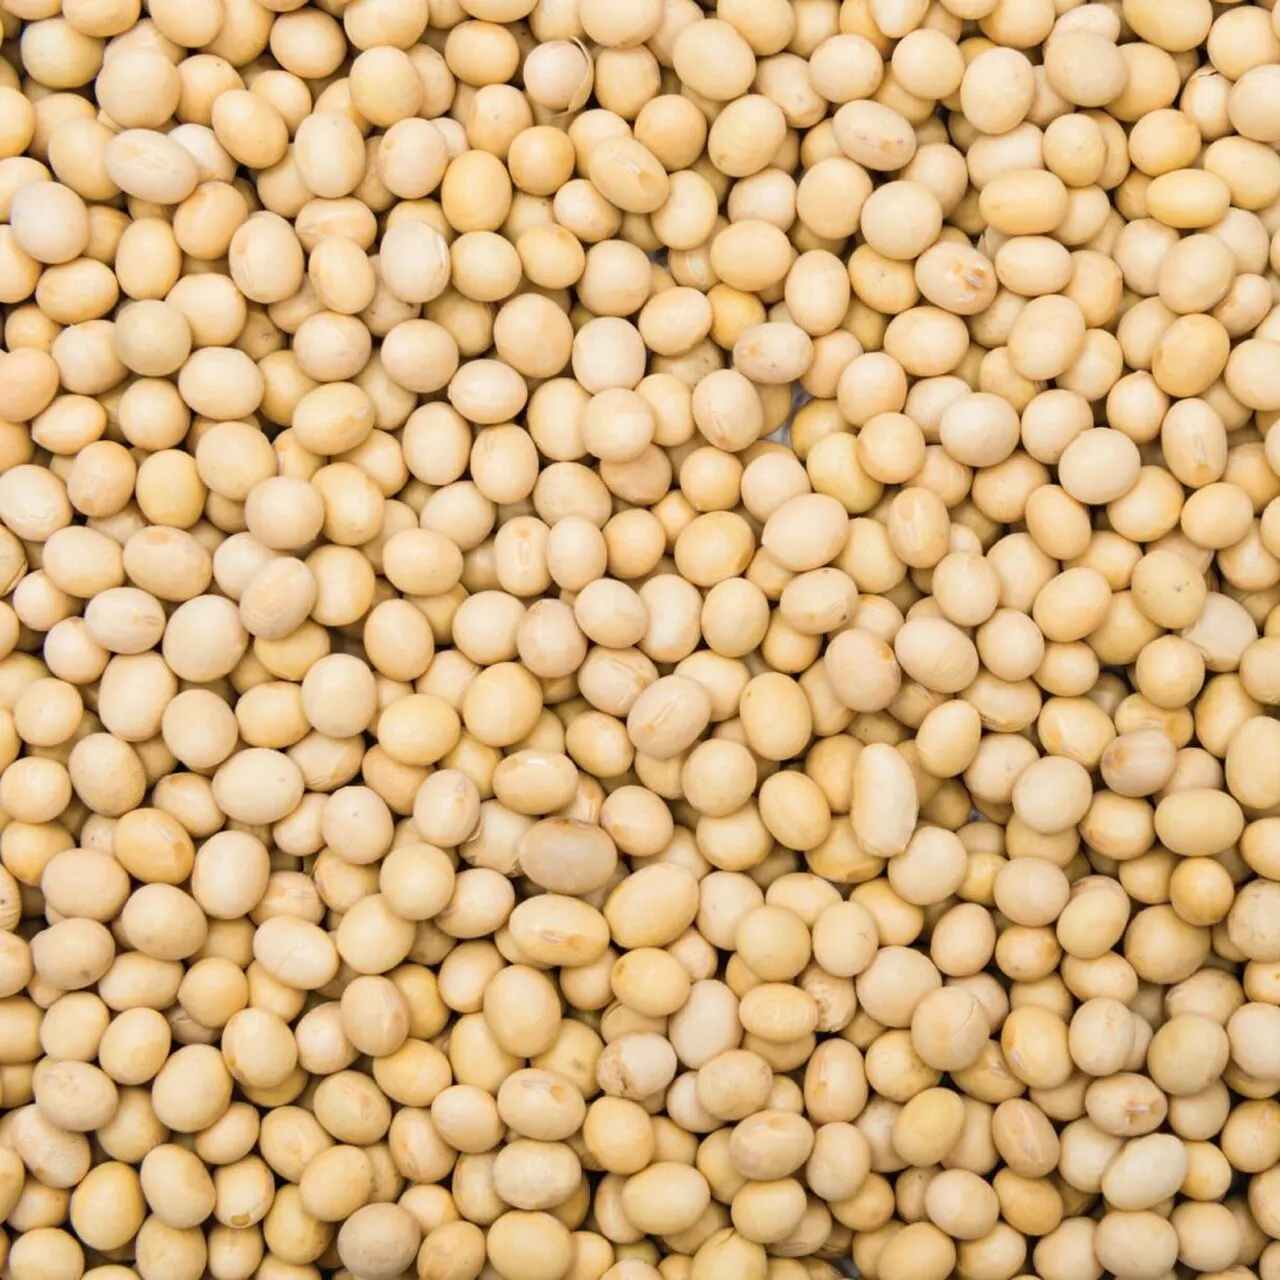 Soybeans - Soybeans High Quality Non GMO Yellow Dry Soybean